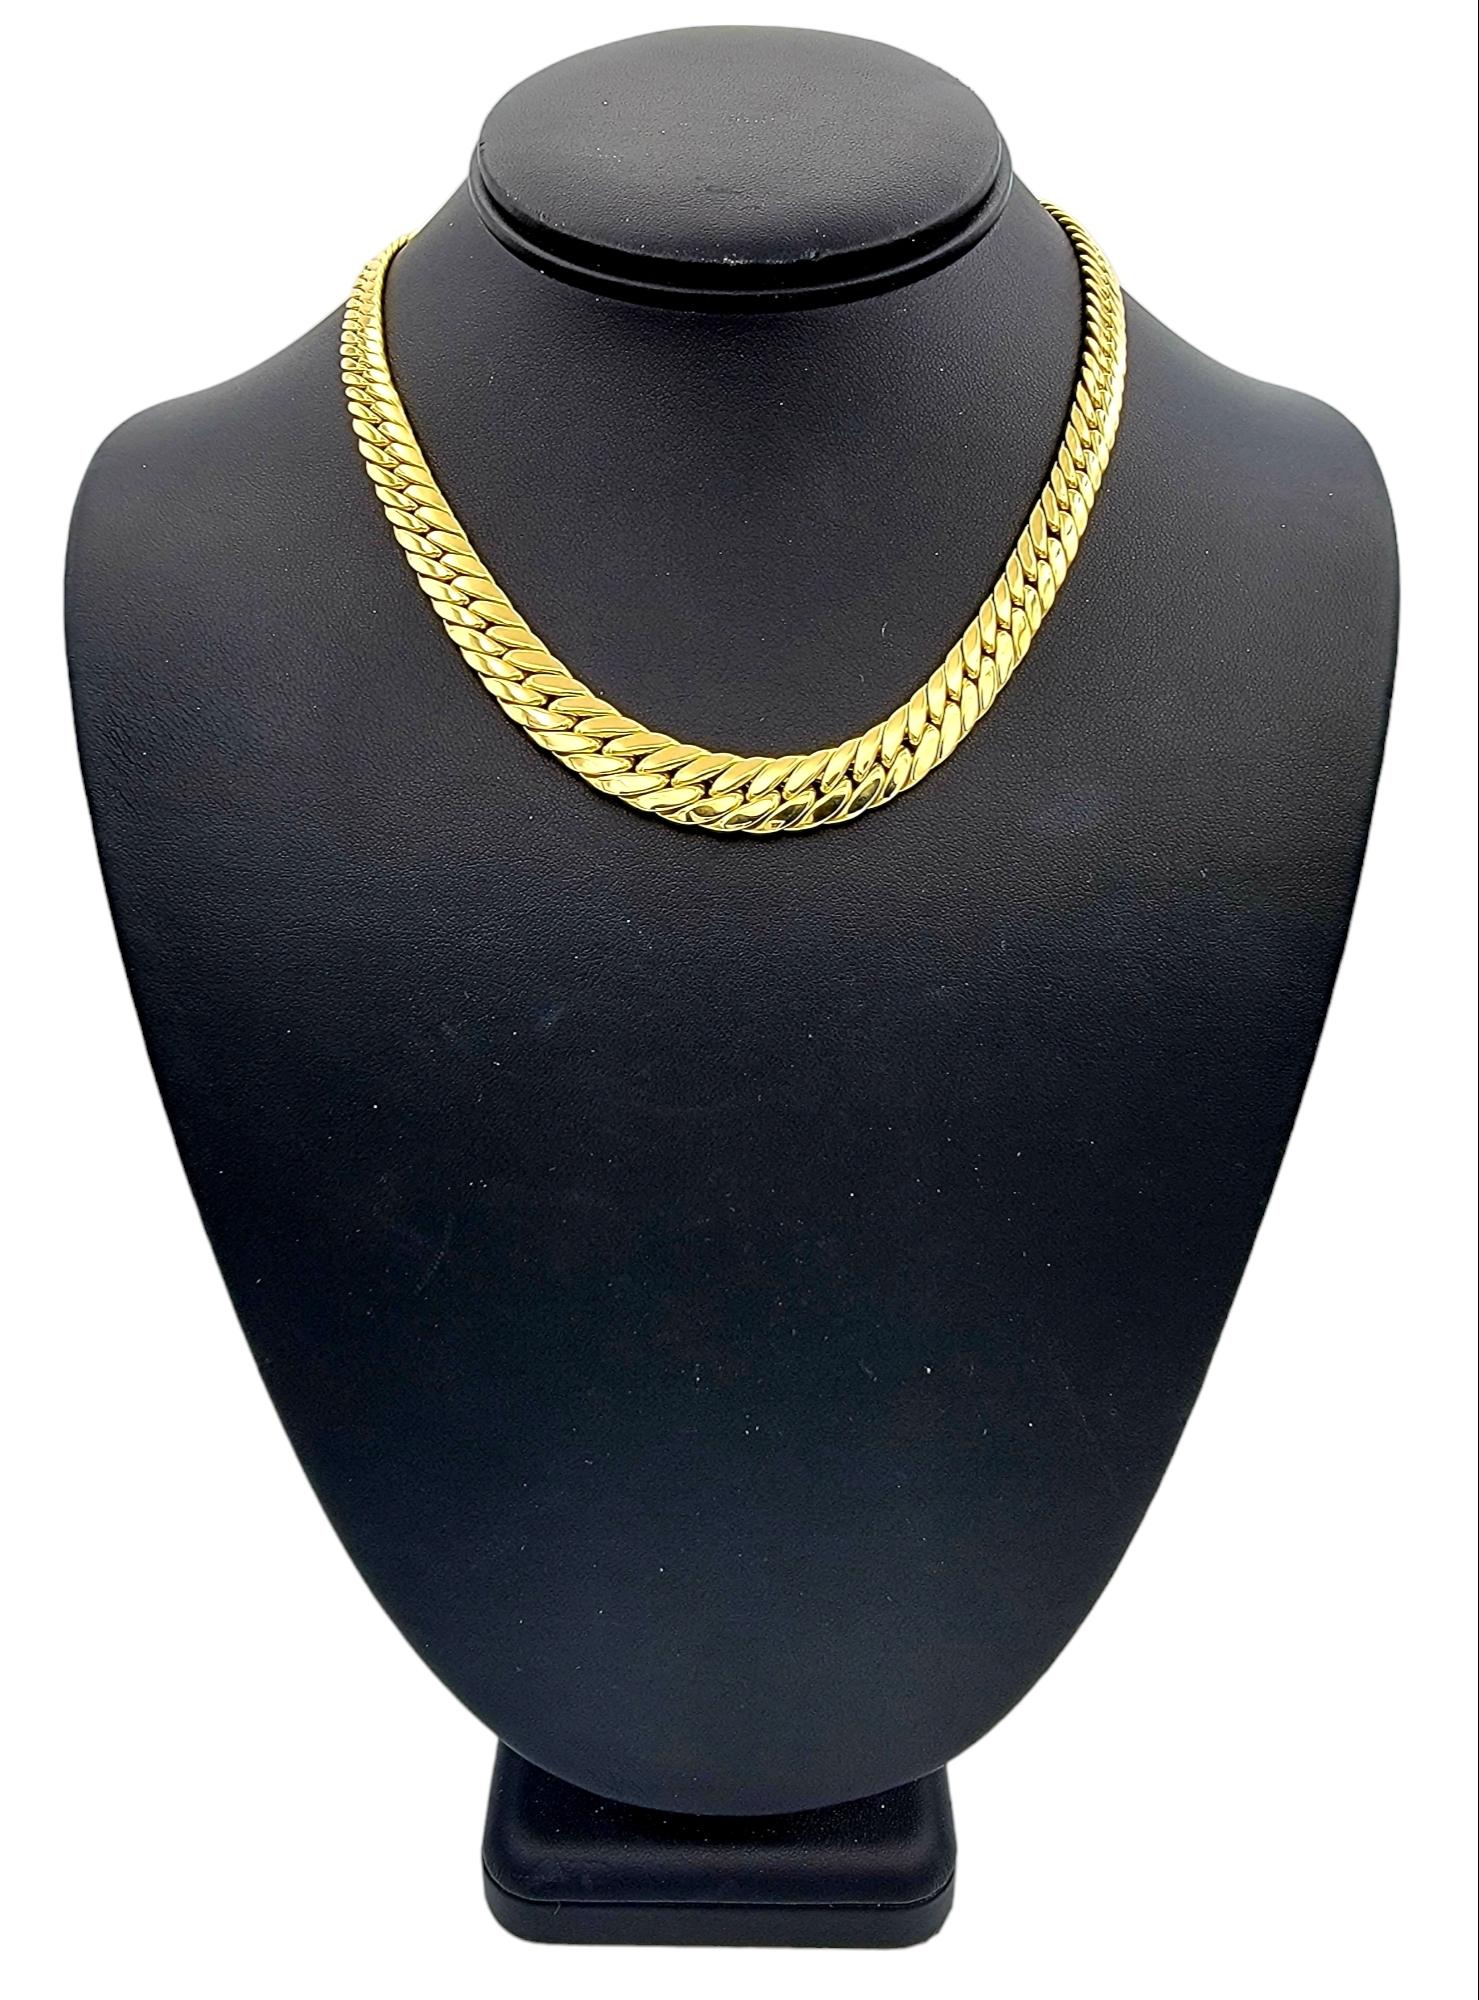 Chunky Graduated Curb Link Chain Necklace in Polished 18 Karat Yellow Gold For Sale 2